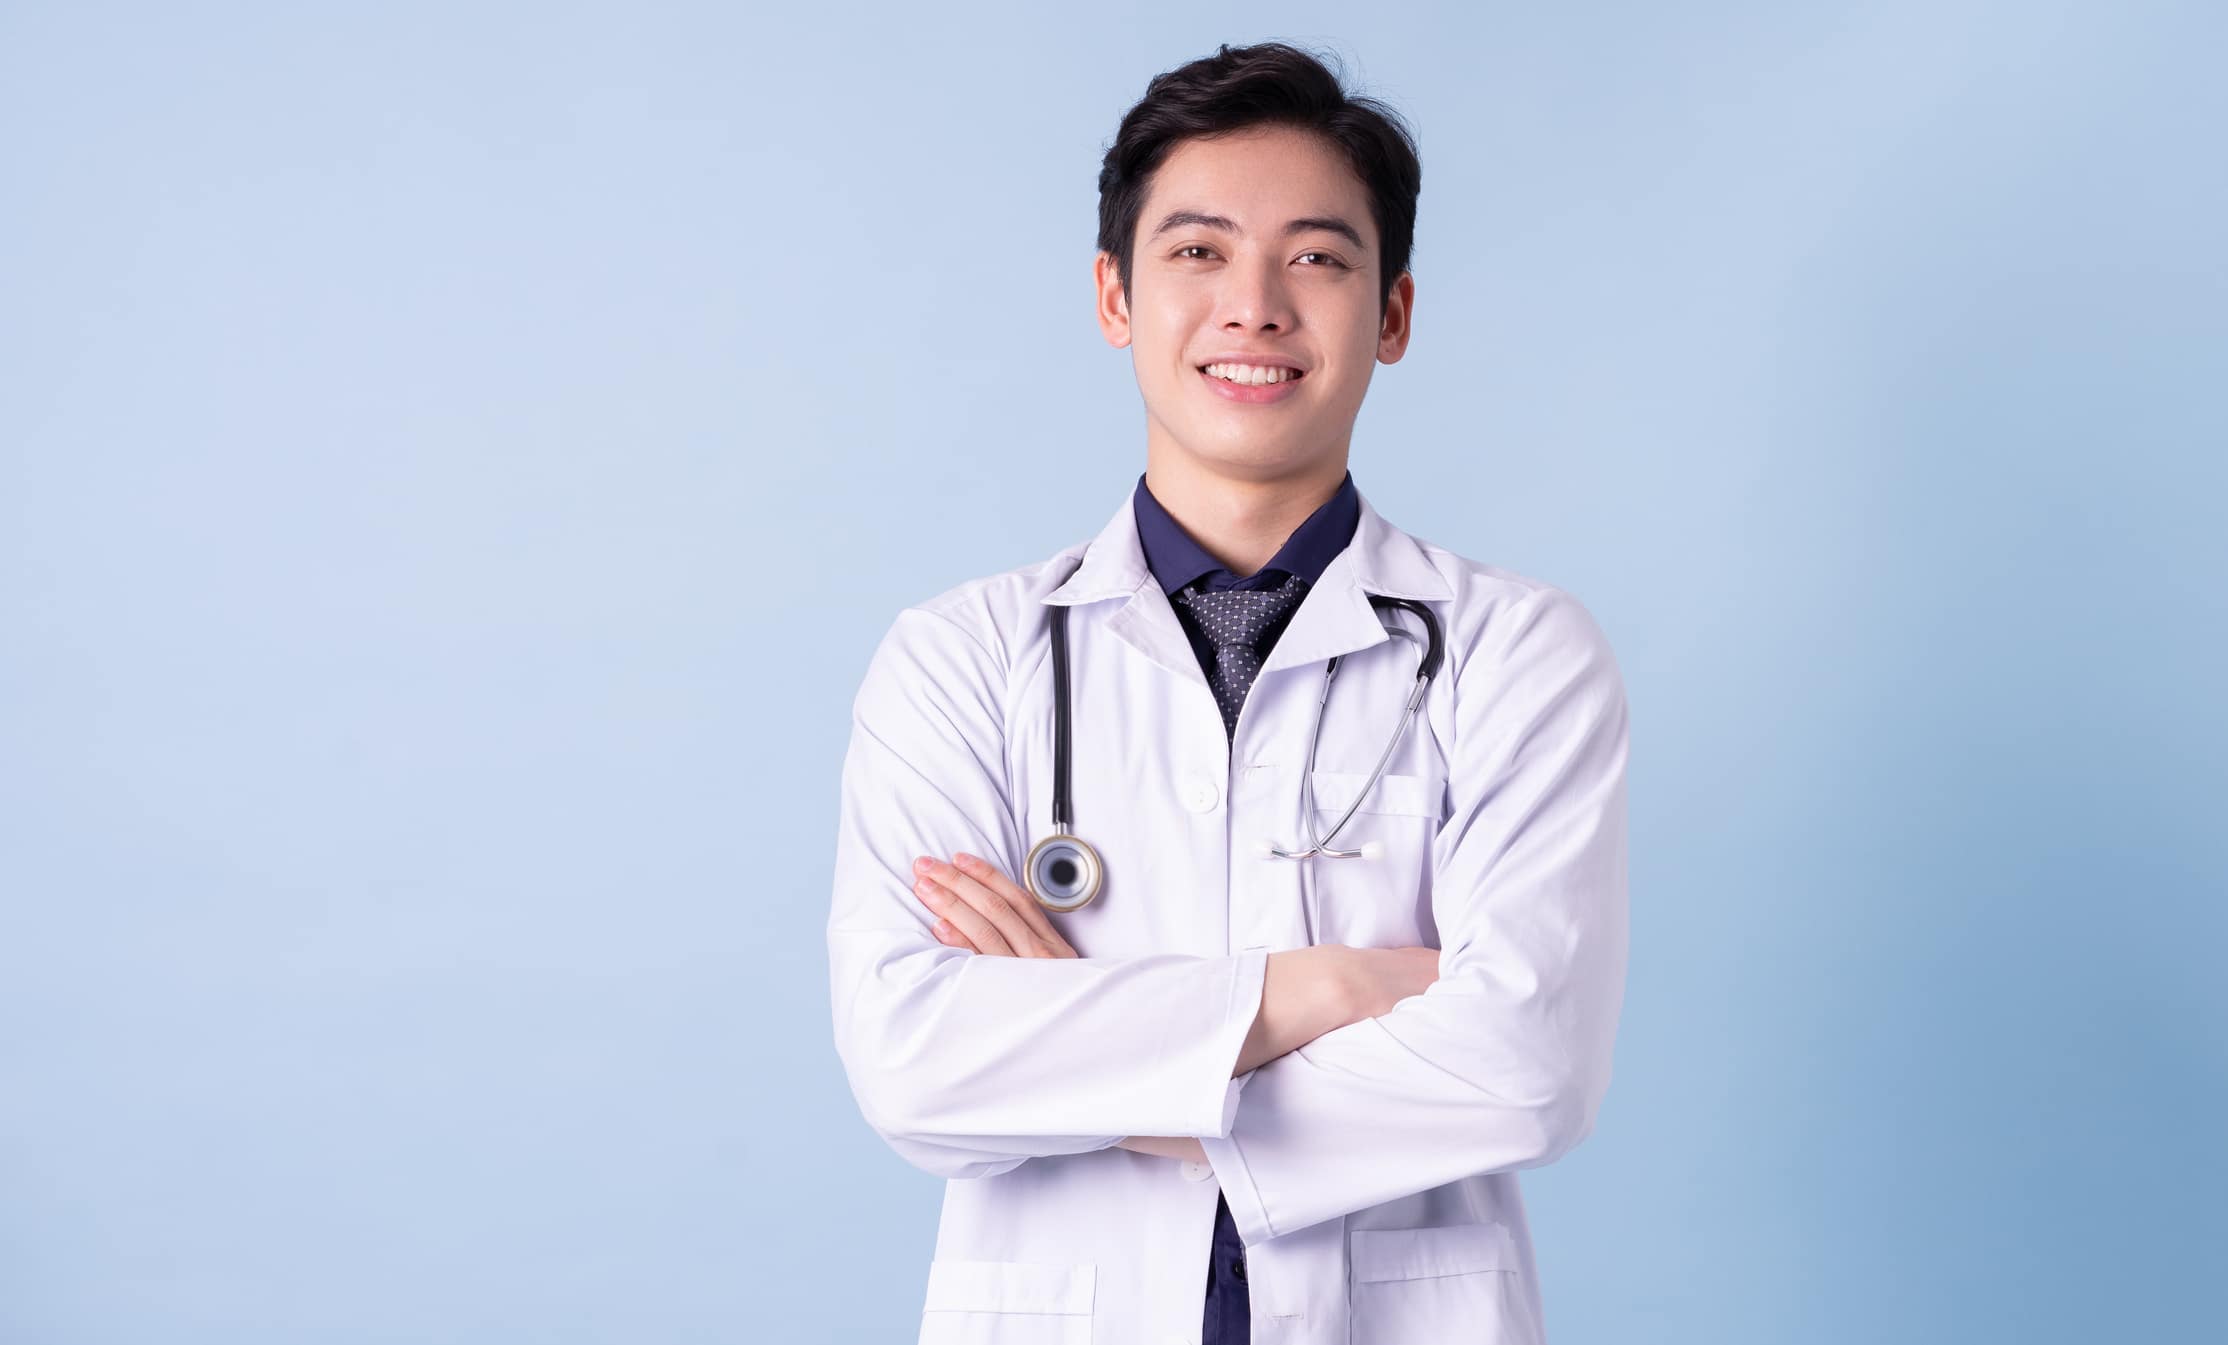 Should You Get a Locum Tenens Position After Completing Your Residency?